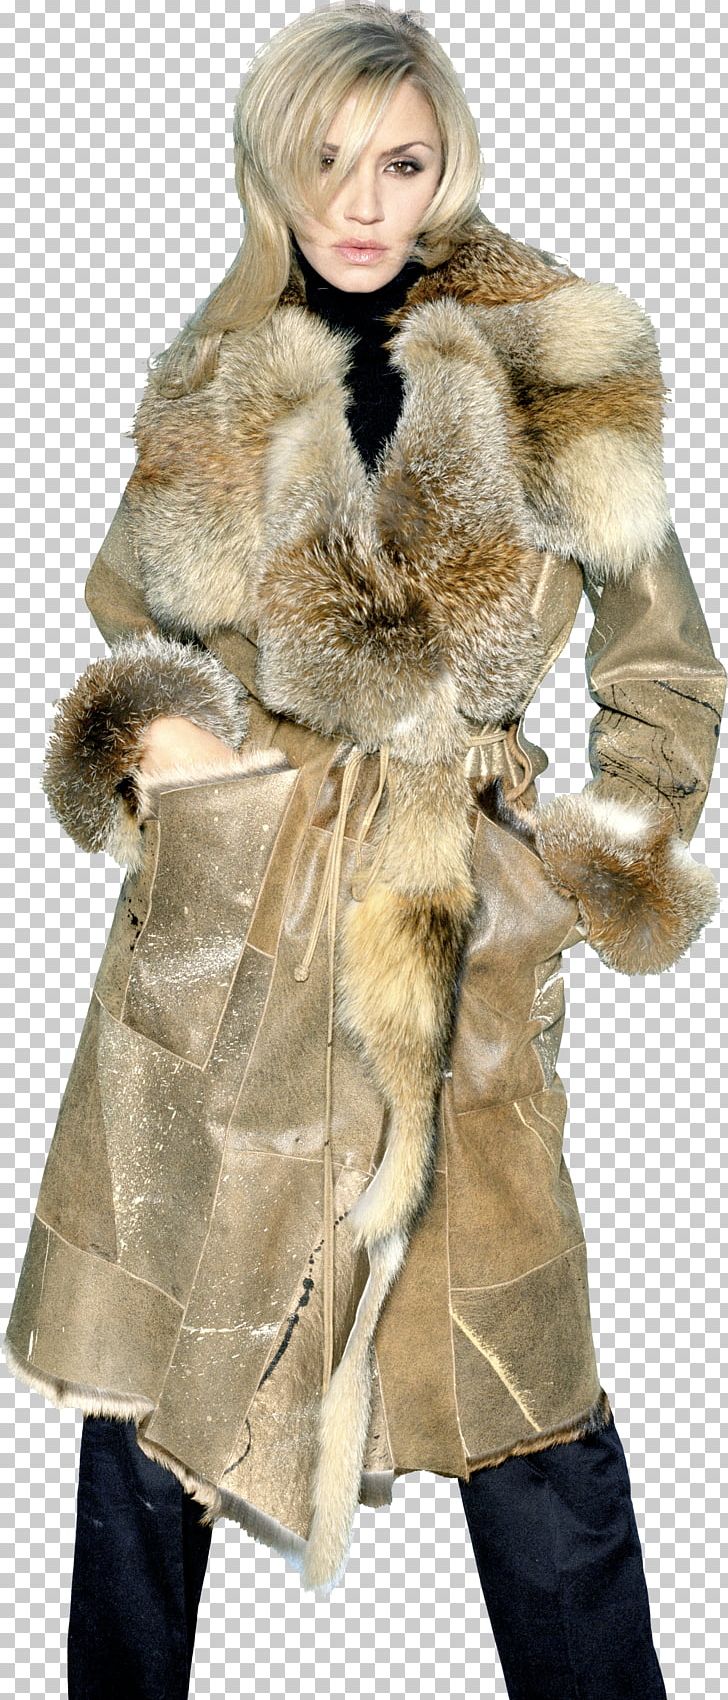 Fur Clothing Overcoat Jacket Animal Product PNG, Clipart, Animal, Animal Product, Clothing, Coat, Fashion Free PNG Download